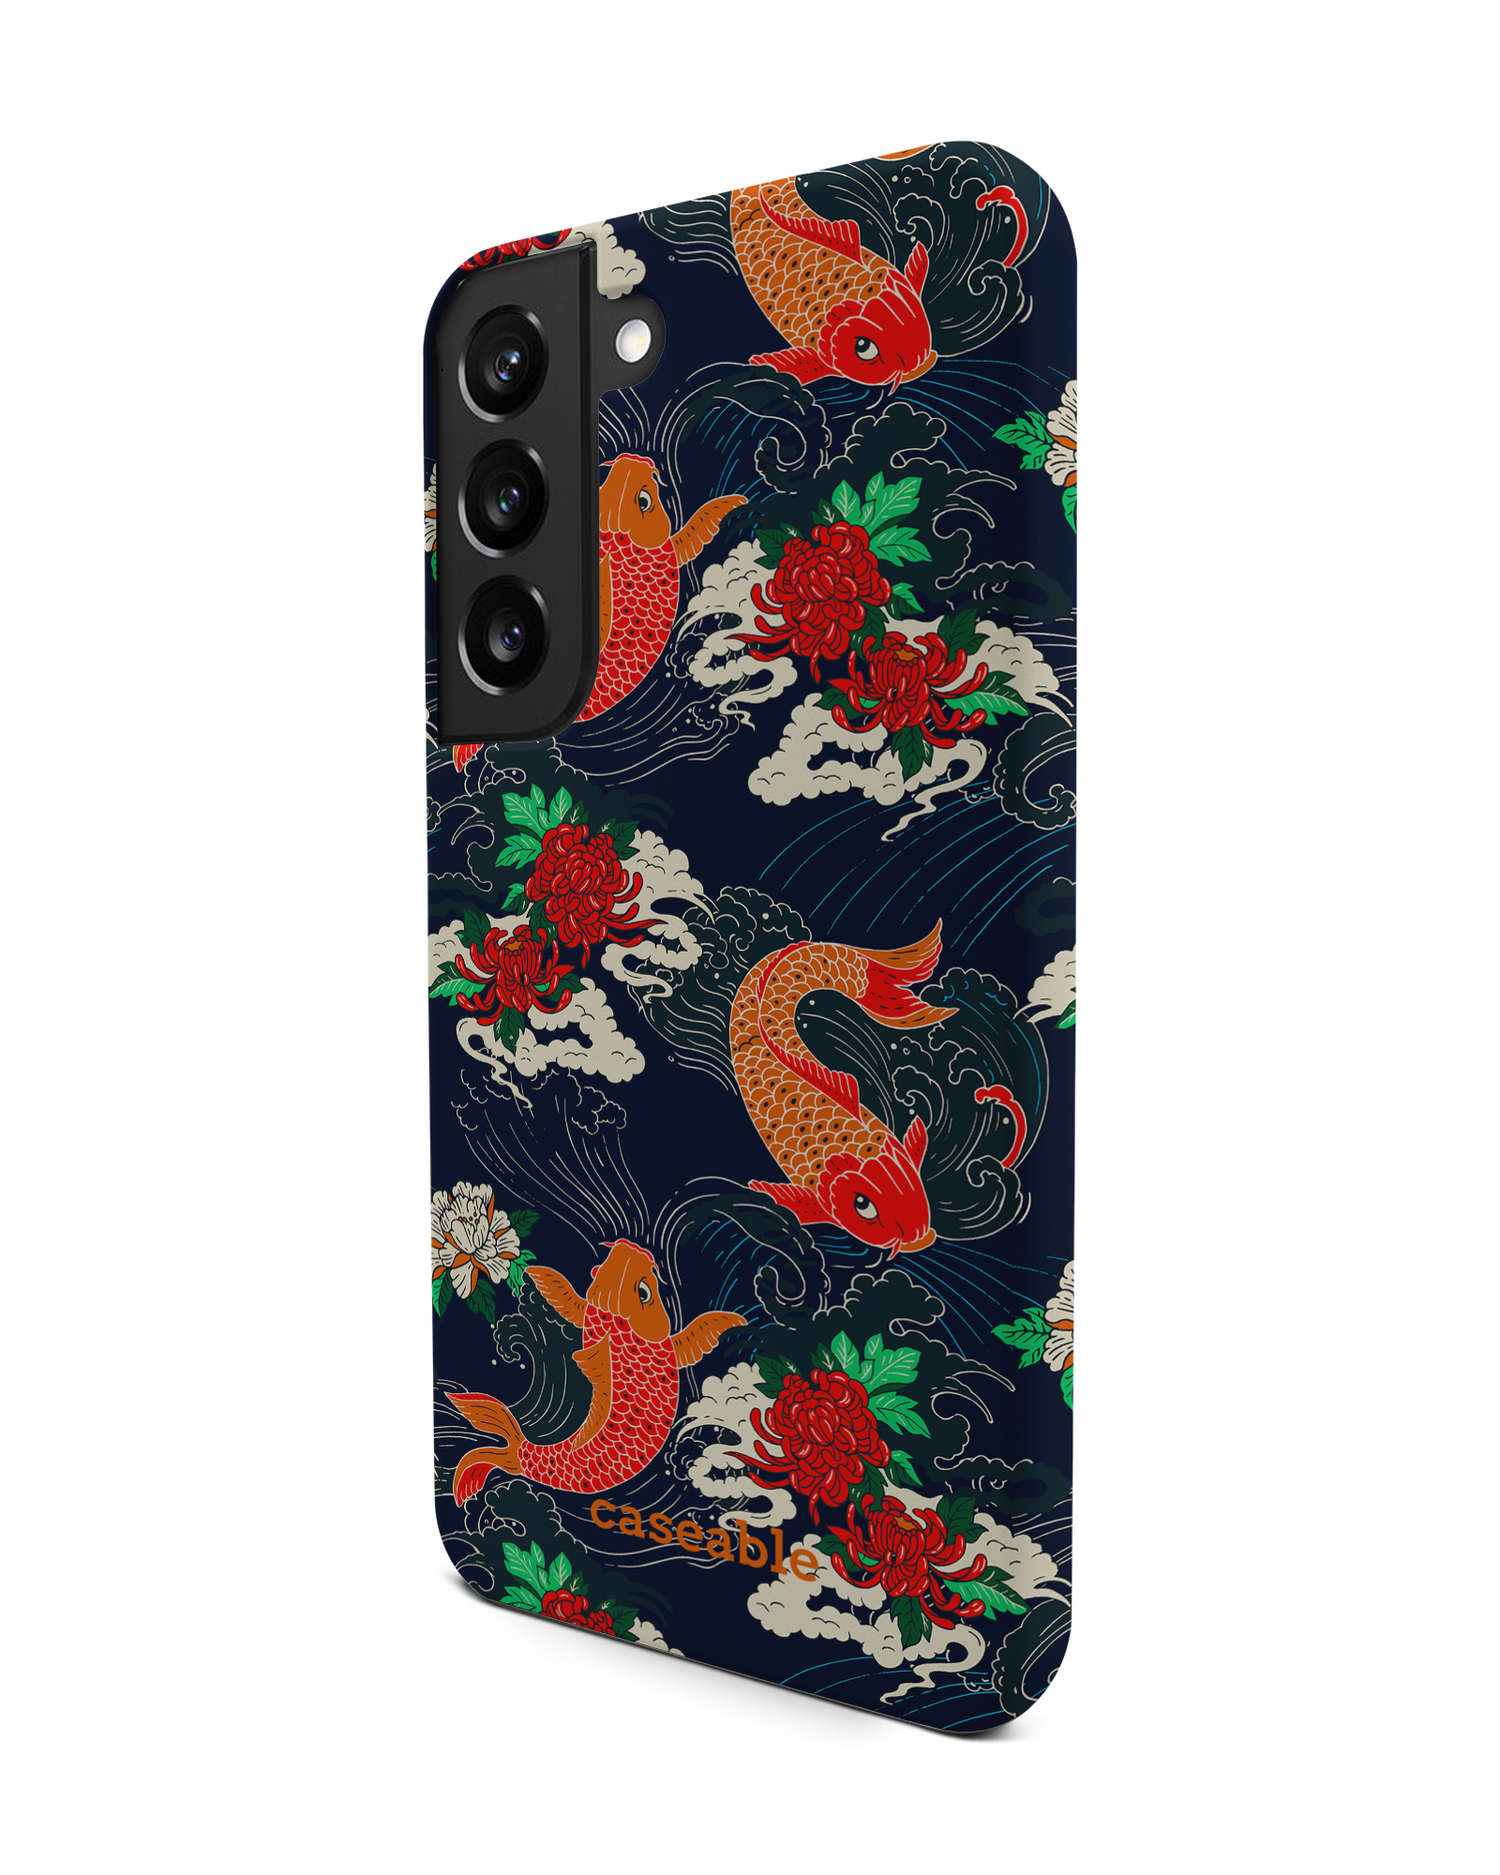 Repeating Koi Premium Phone Case Samsung Galaxy S22 5G: View from the right side